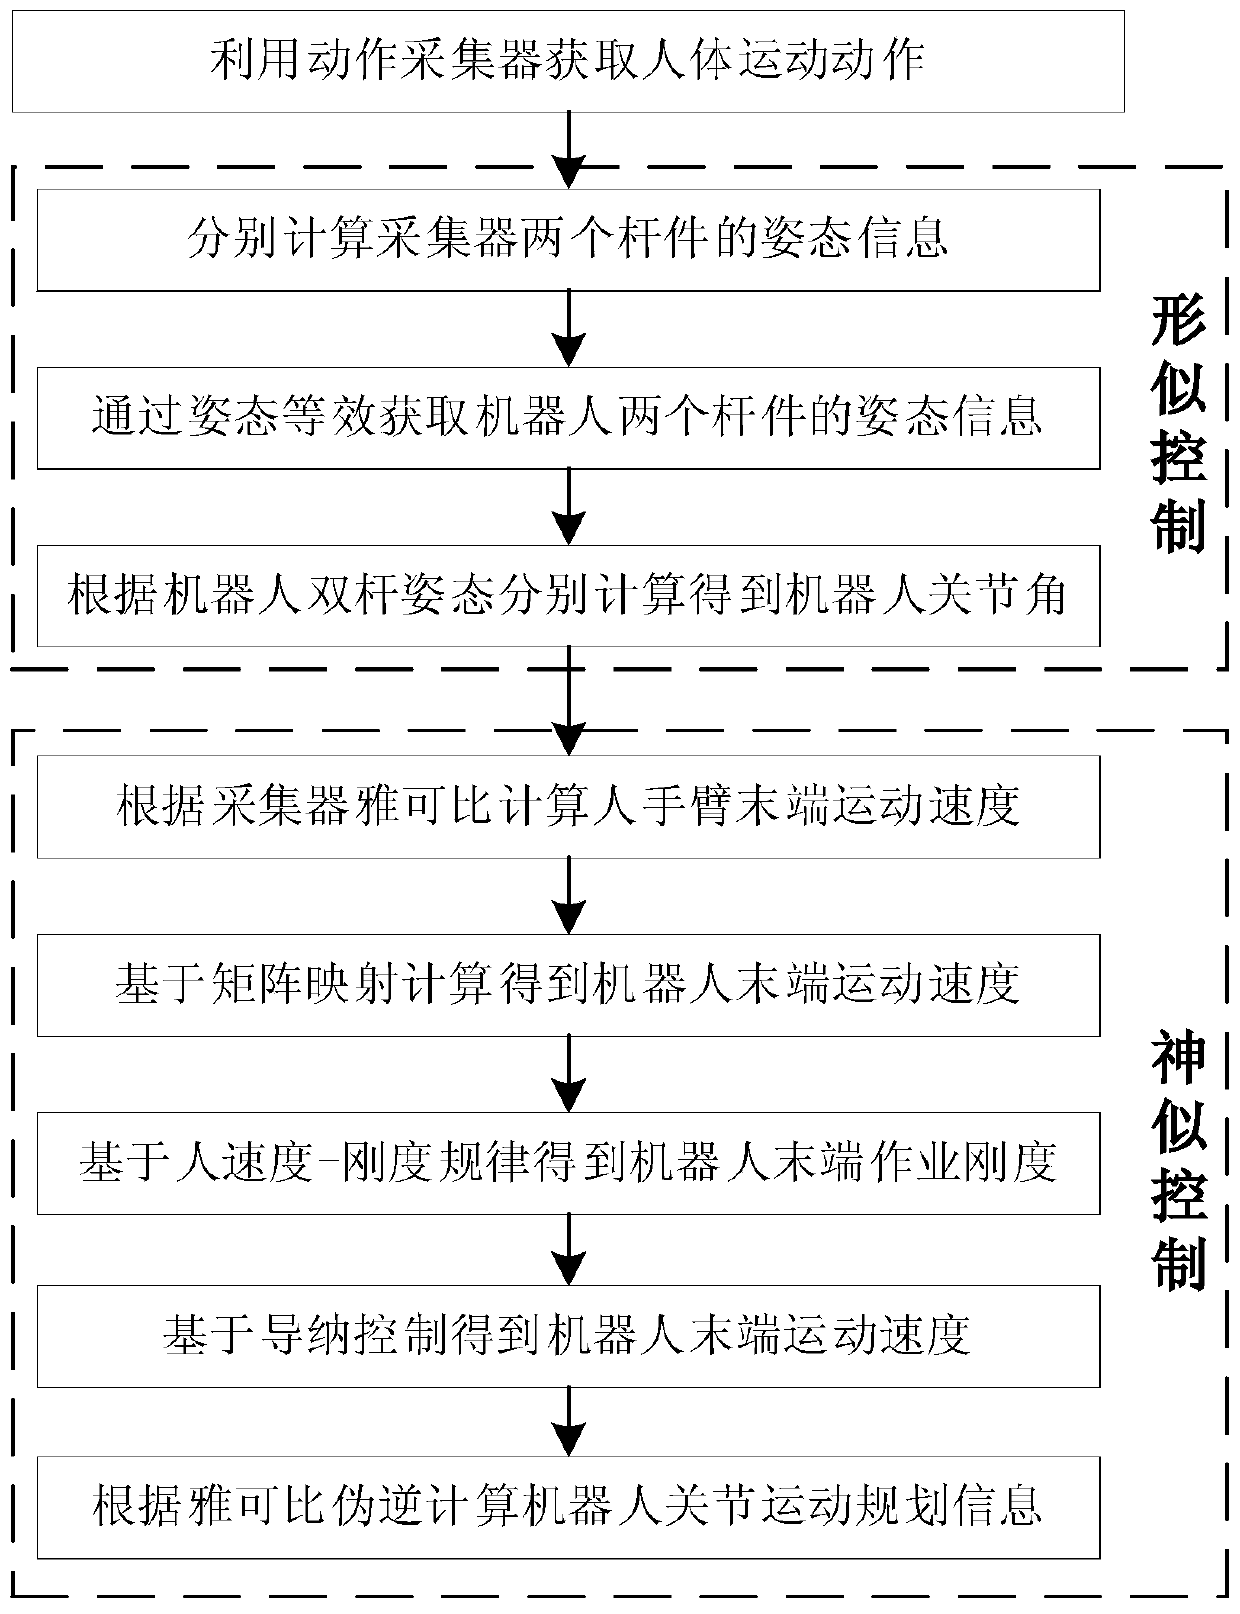 Similarity-in-form and similarity-in-spirit combined person simulating double-arm robot motion planning control method